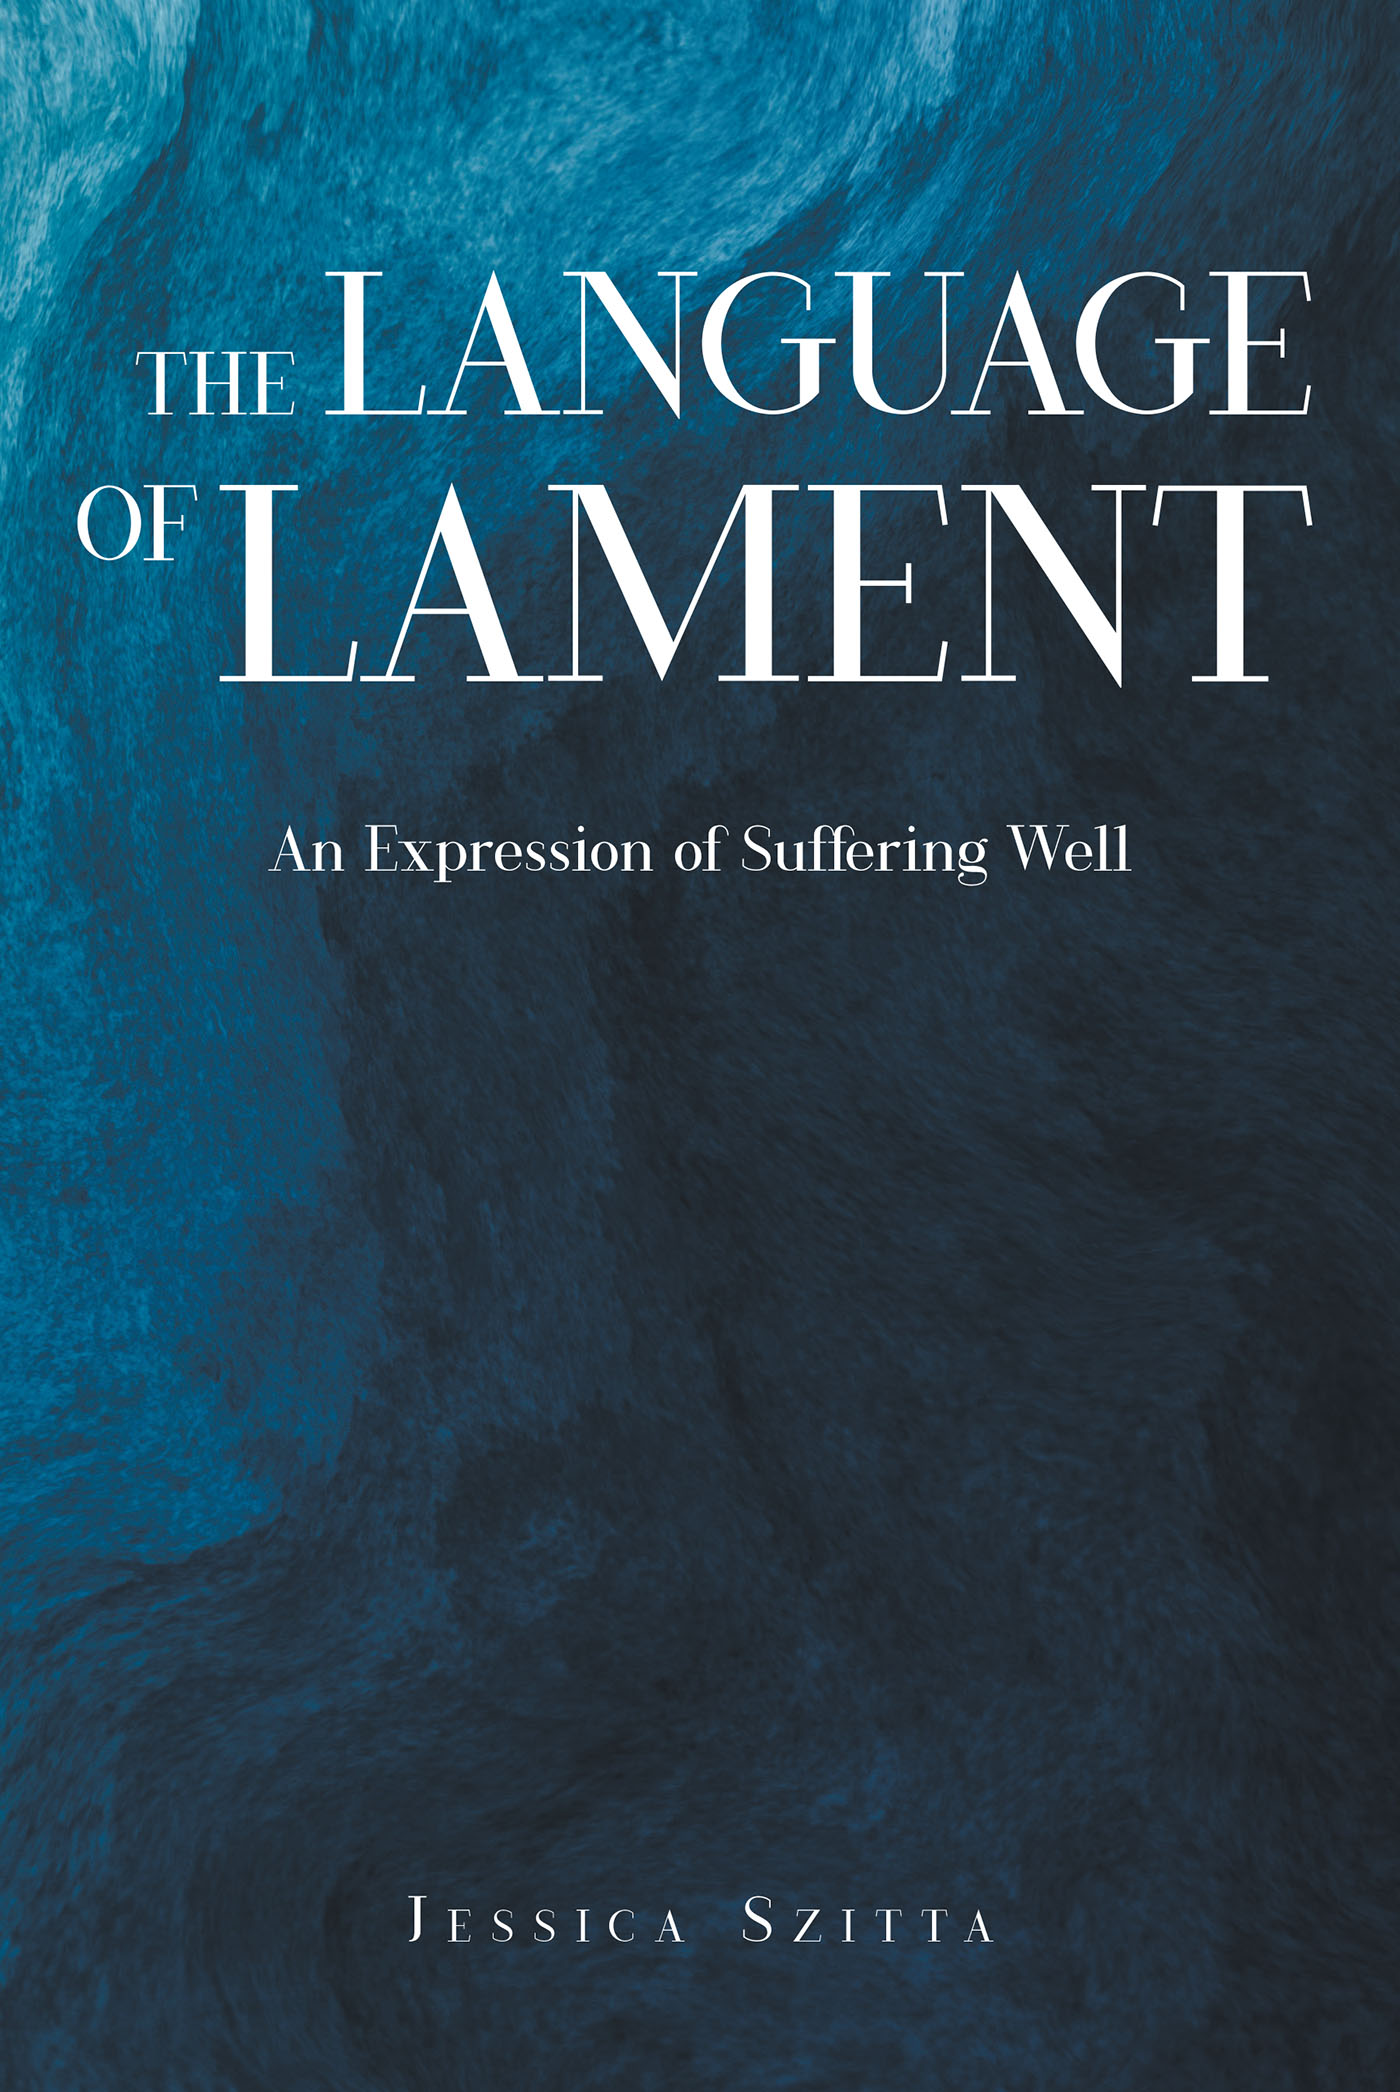 Jessica Szitta’s Newly Released "The Language of Lament: An Expression of Suffering Well" is an Emotionally Charged Journey of Loss and Healing